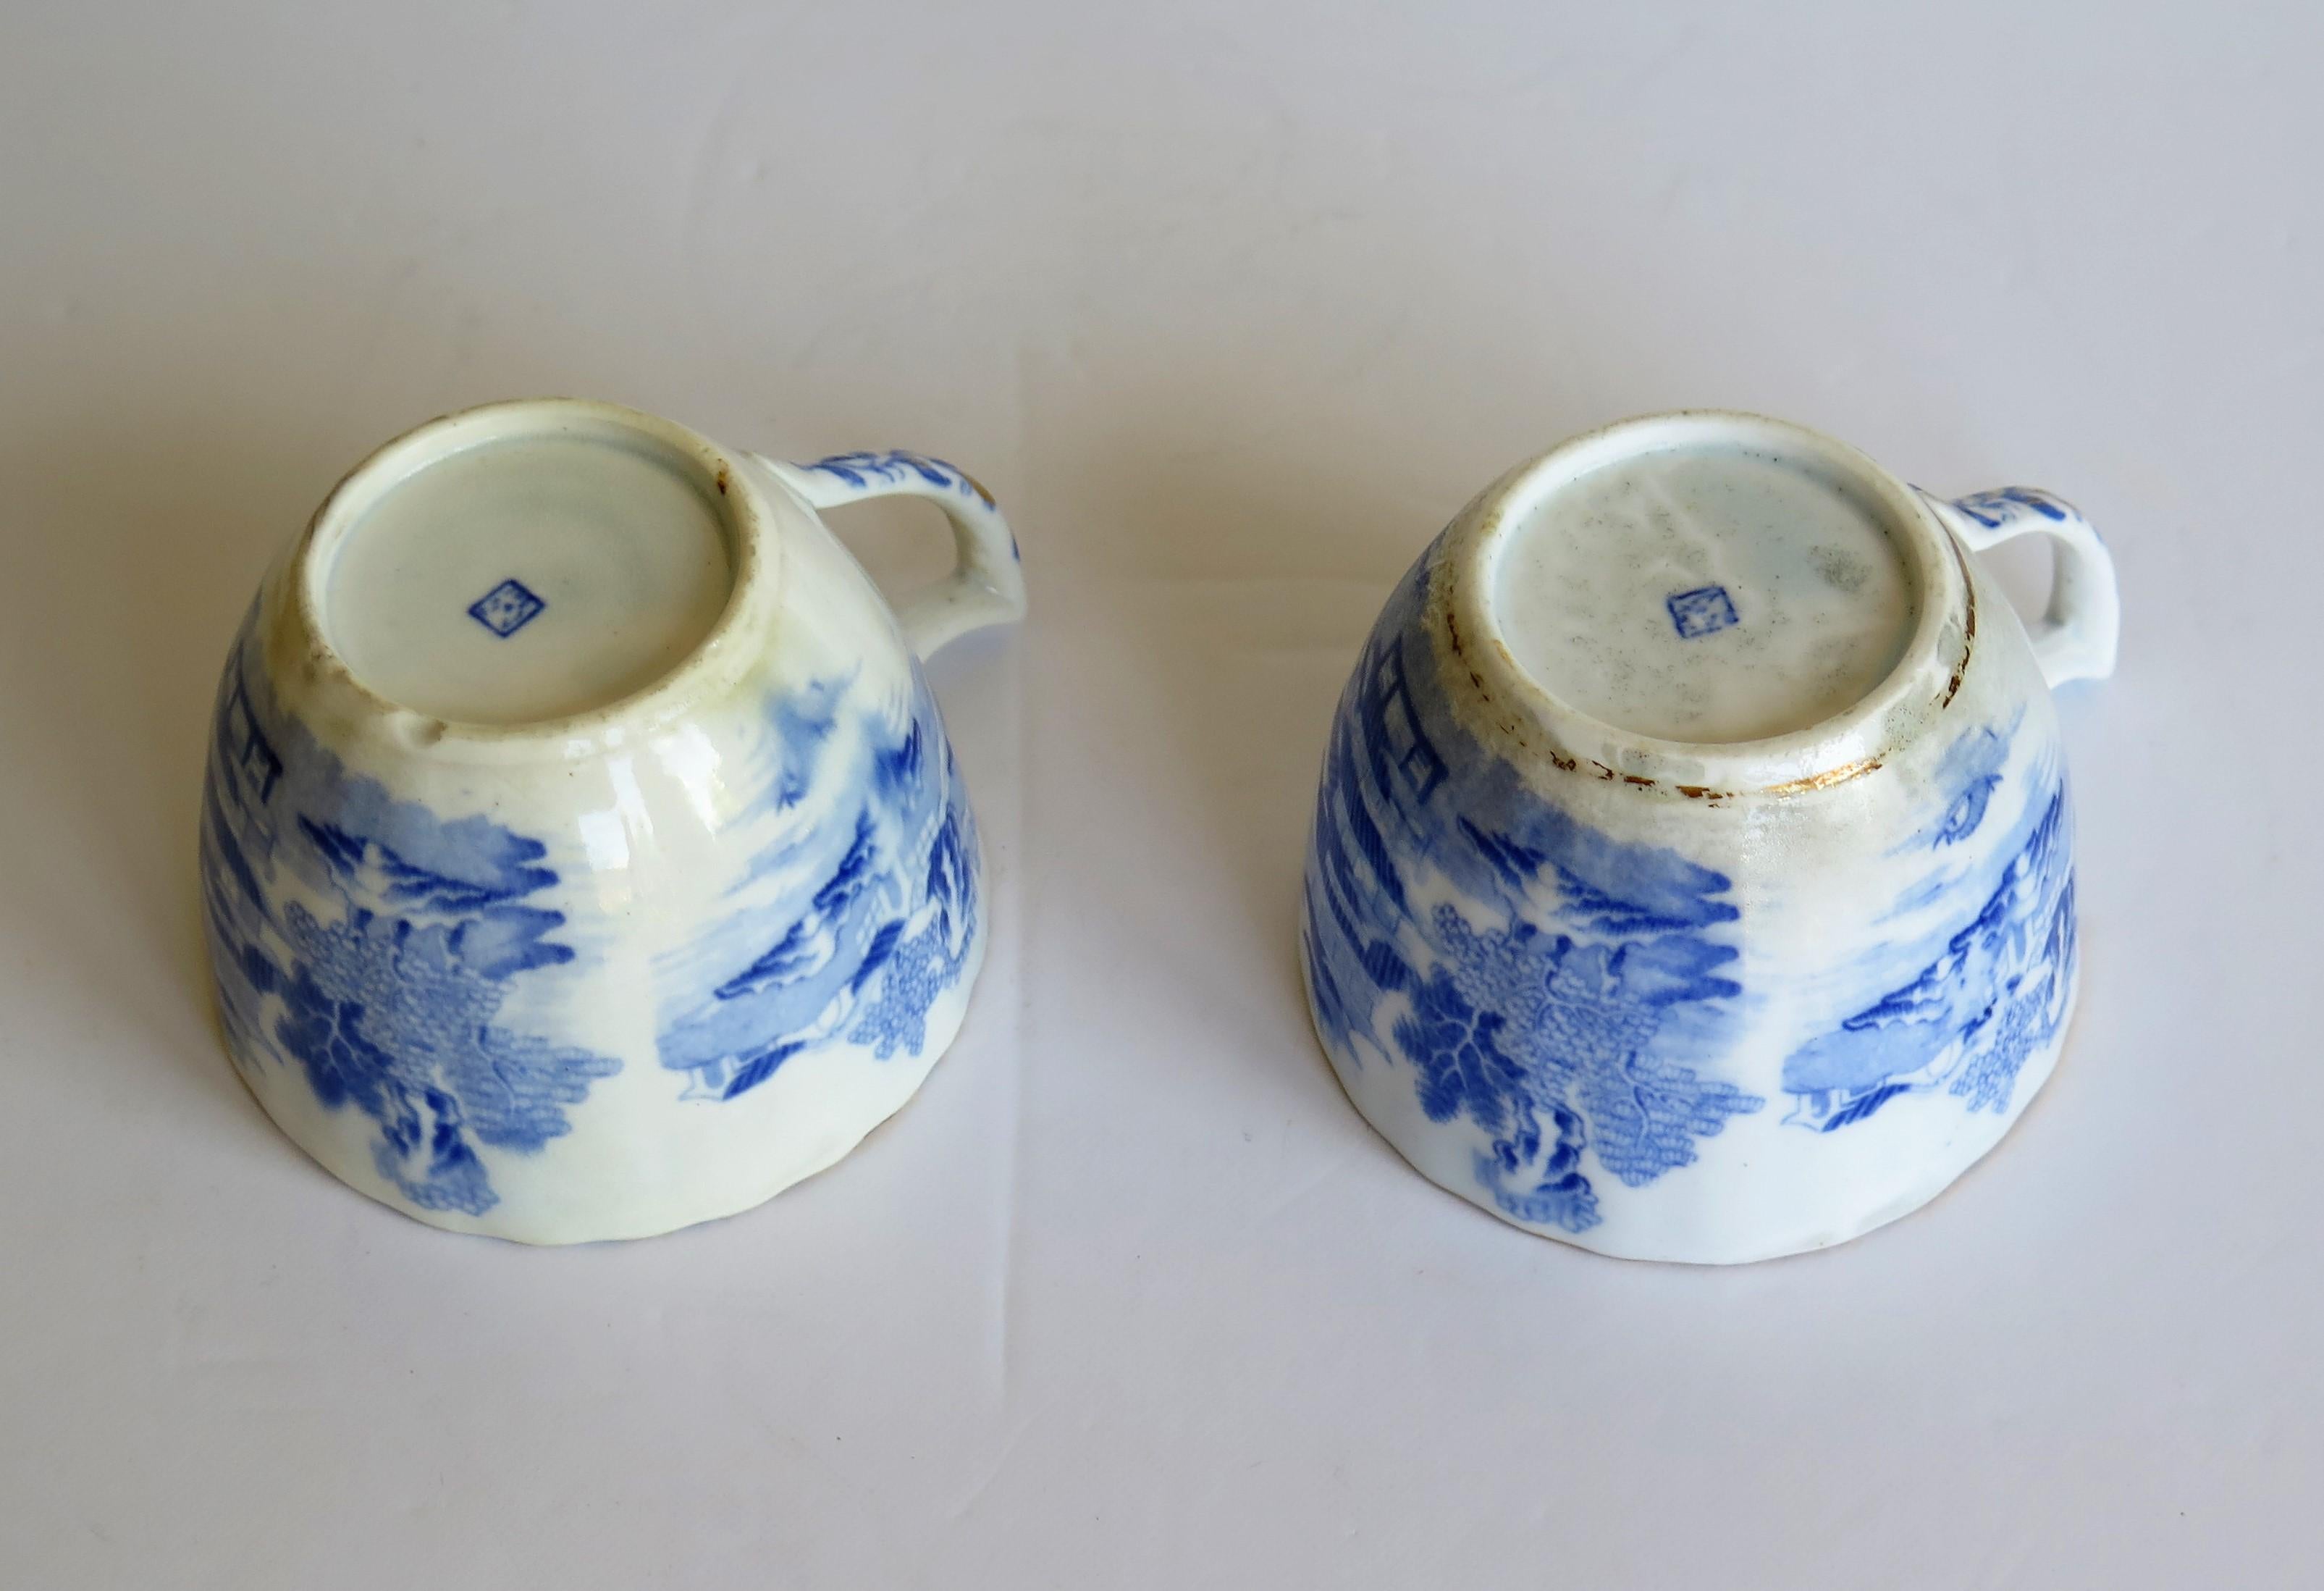 Miles Mason Porcelain Pair of Tea Cups Broseley Blue and White Pattern, Ca 1805 9